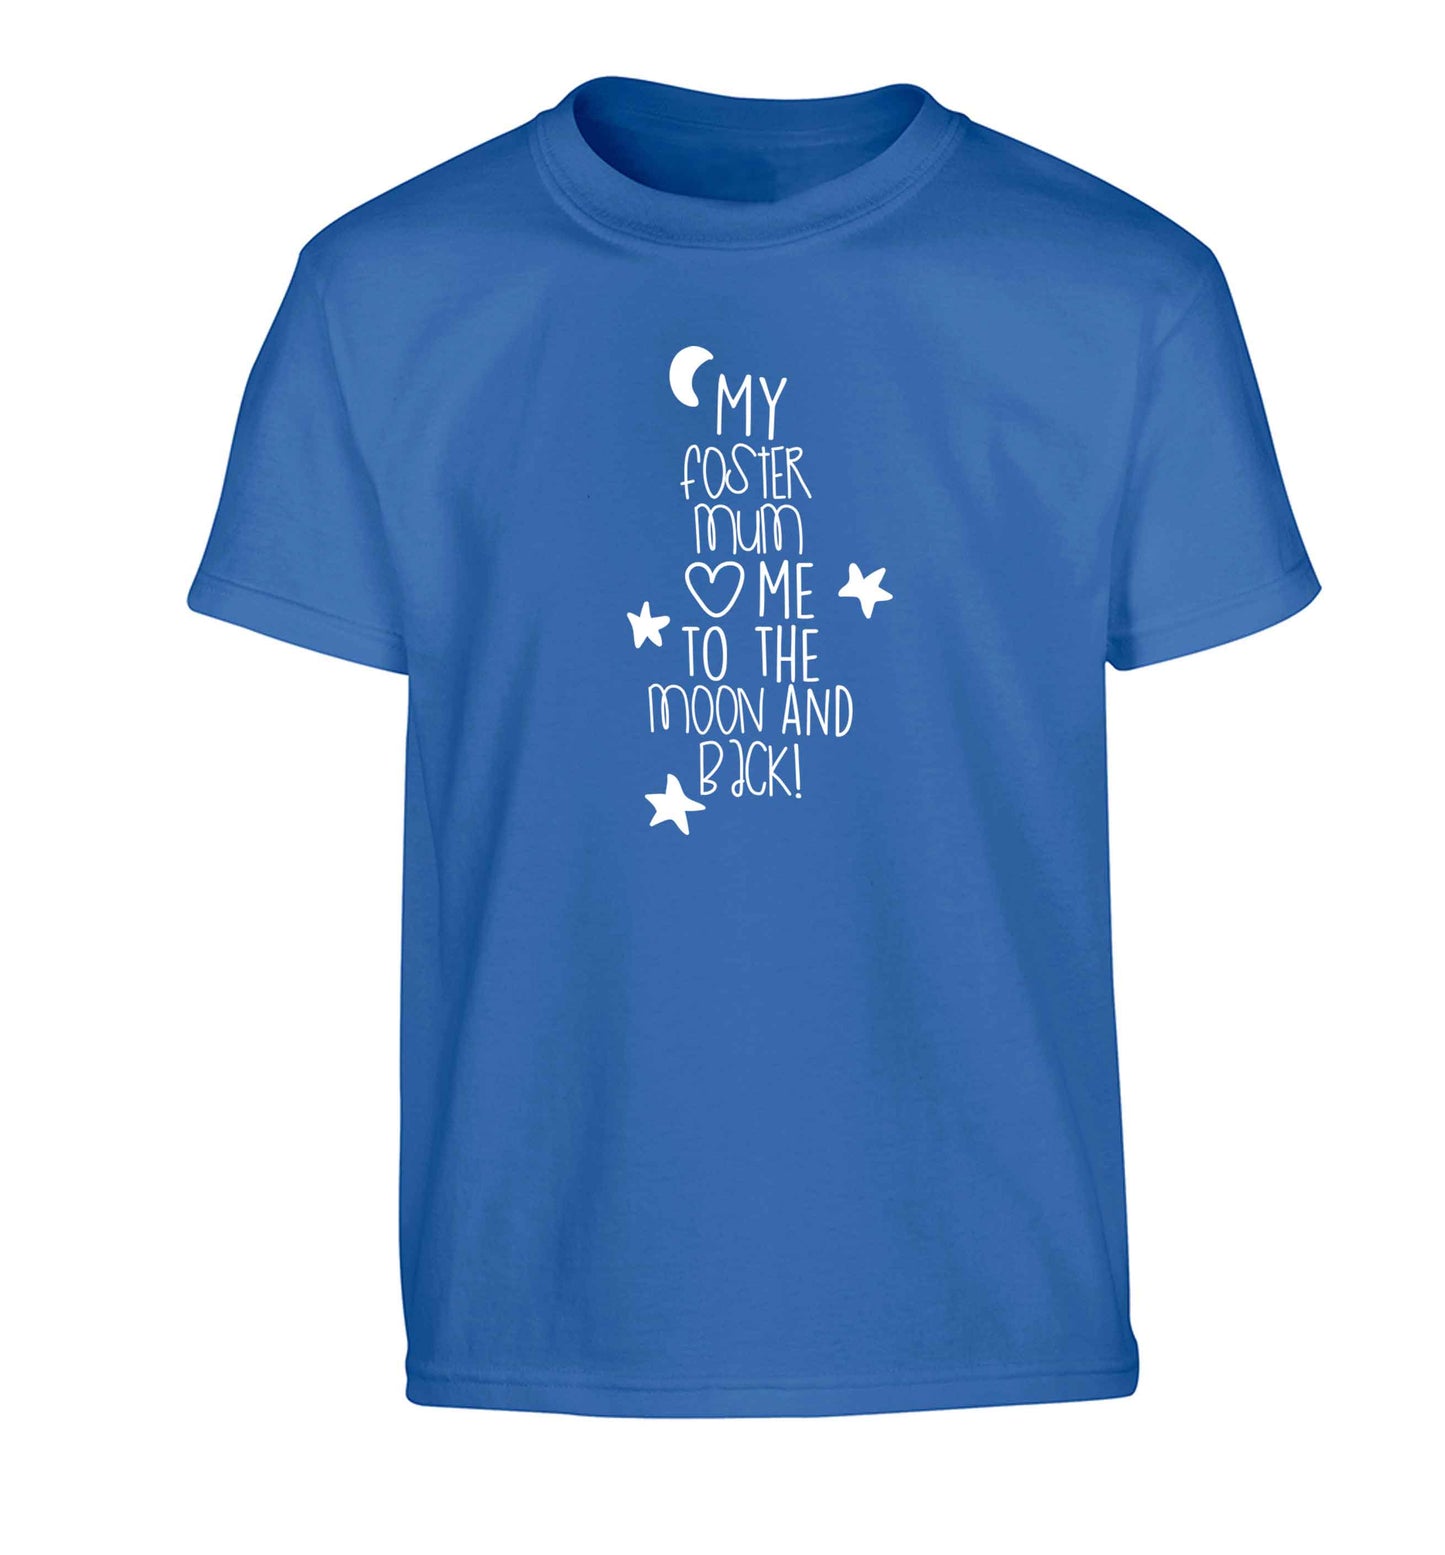 My foster mum loves me to the moon and back Children's blue Tshirt 12-13 Years